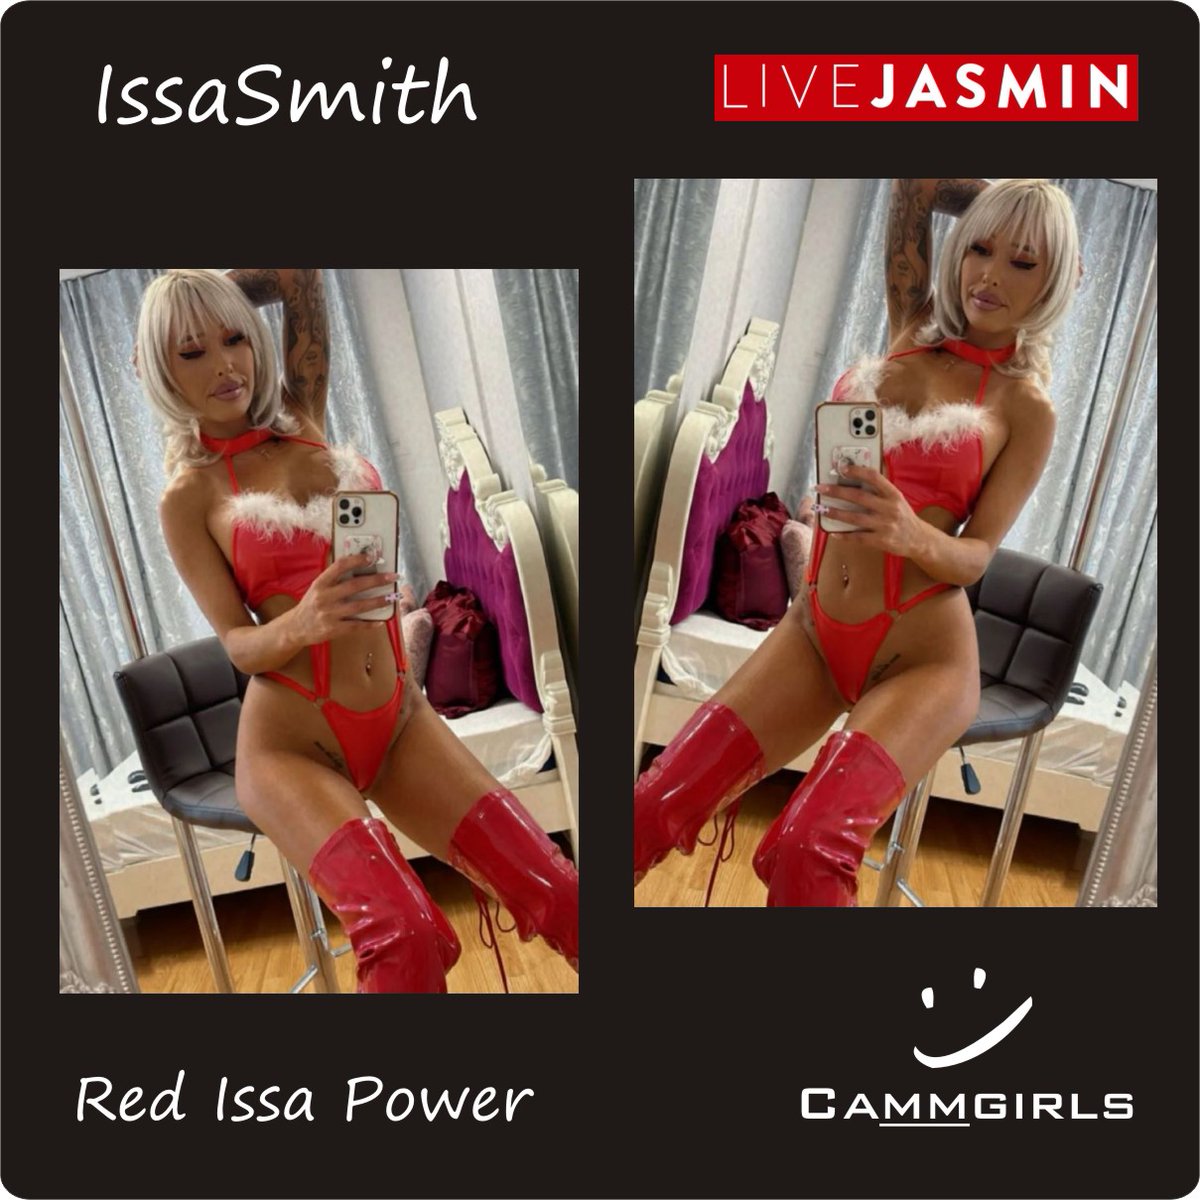 Mistress Goddess Romania 

Red is a powerful colour and  tool and IssaSmith know exactly how to use it the  right way !

bit.ly/3VgRf80

#cammgirls #smilewithconfidence  #trafficX